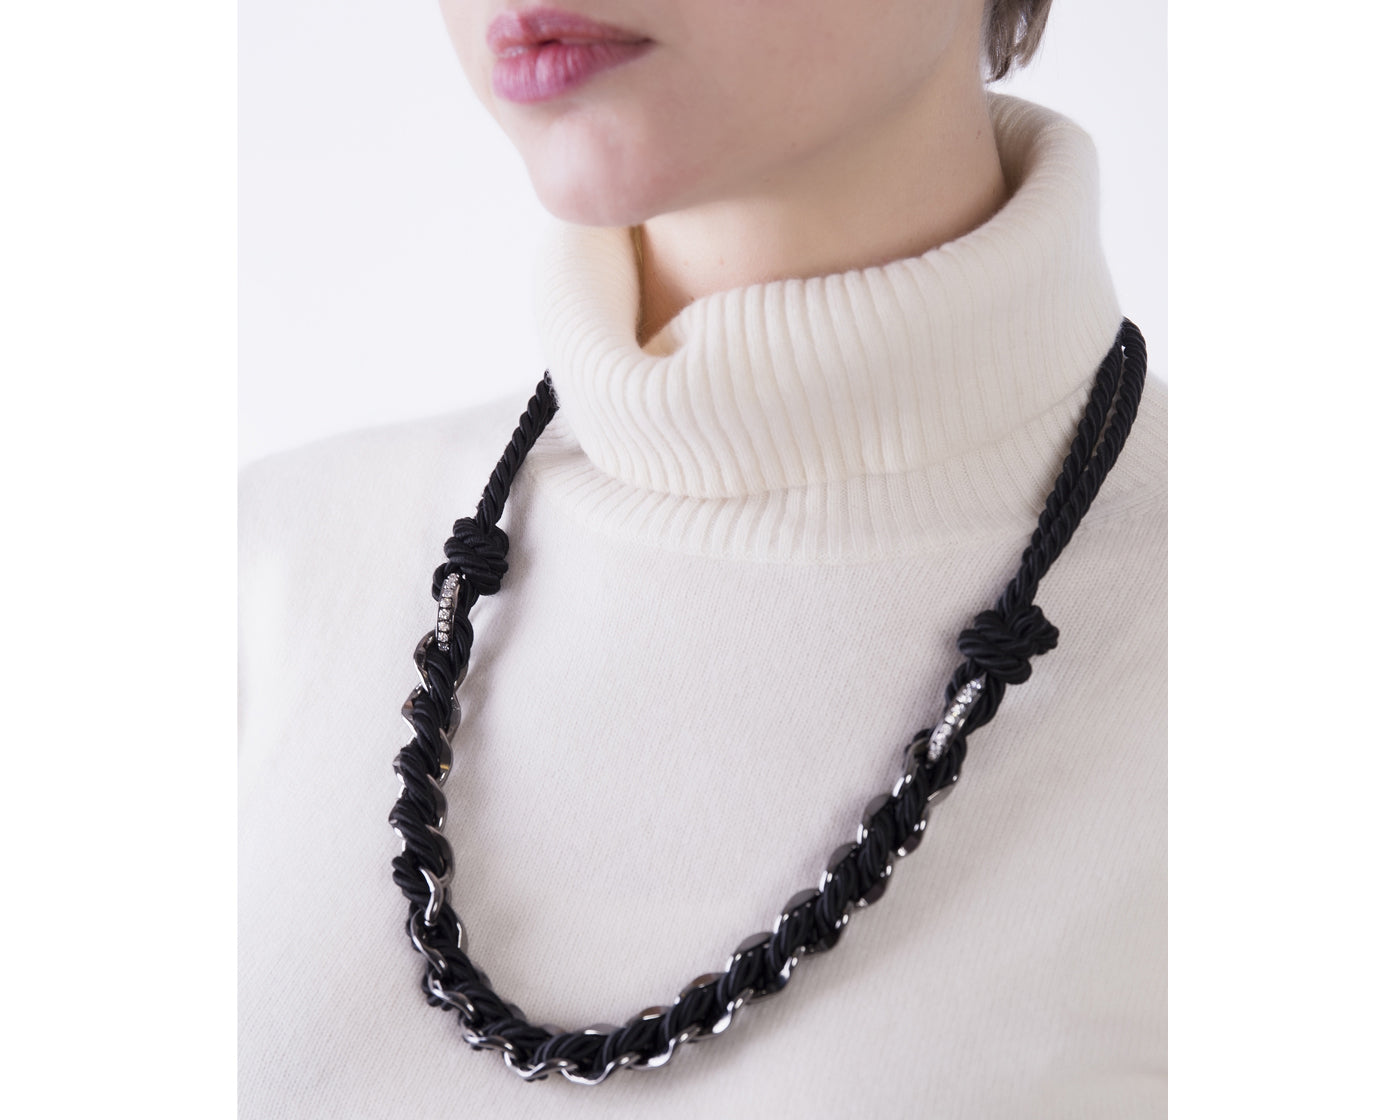 CORDA BLACK SILVER - SOLD OUT